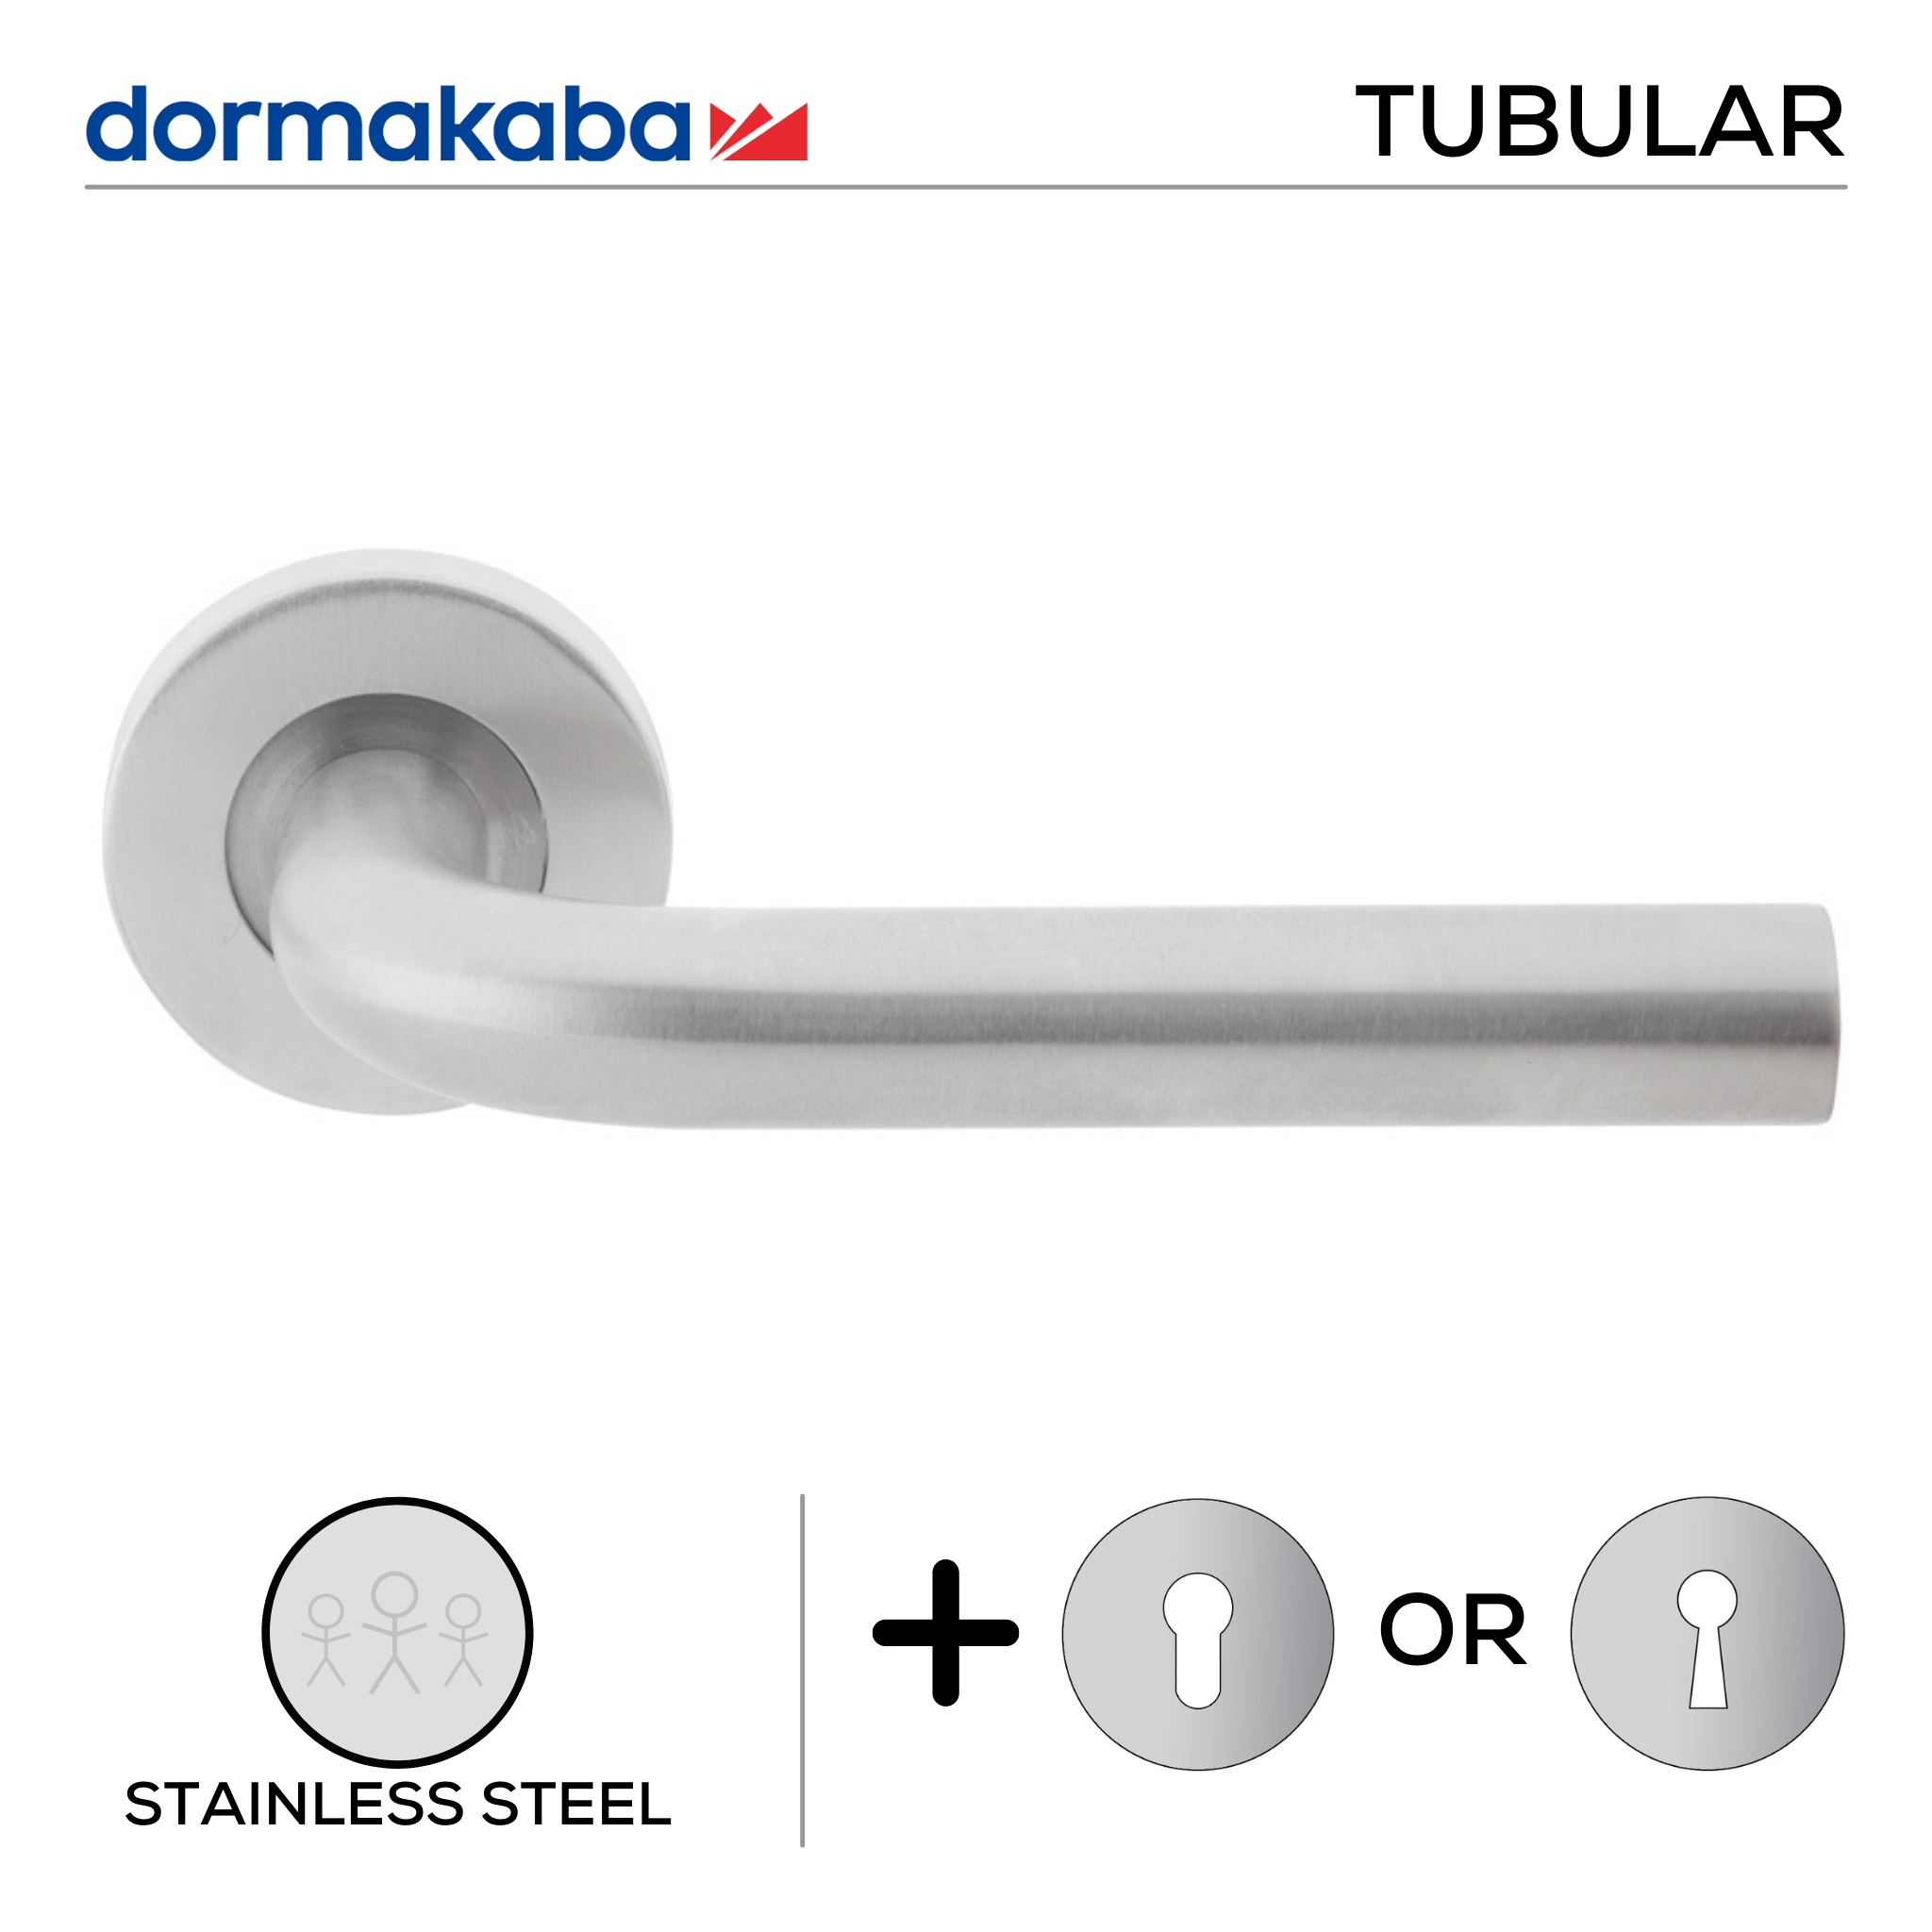 TH 126, Lever Handles, Tubular, On Round Rose, With Escutcheons, 148mm (l), Stainless Steel, DORMAKABA